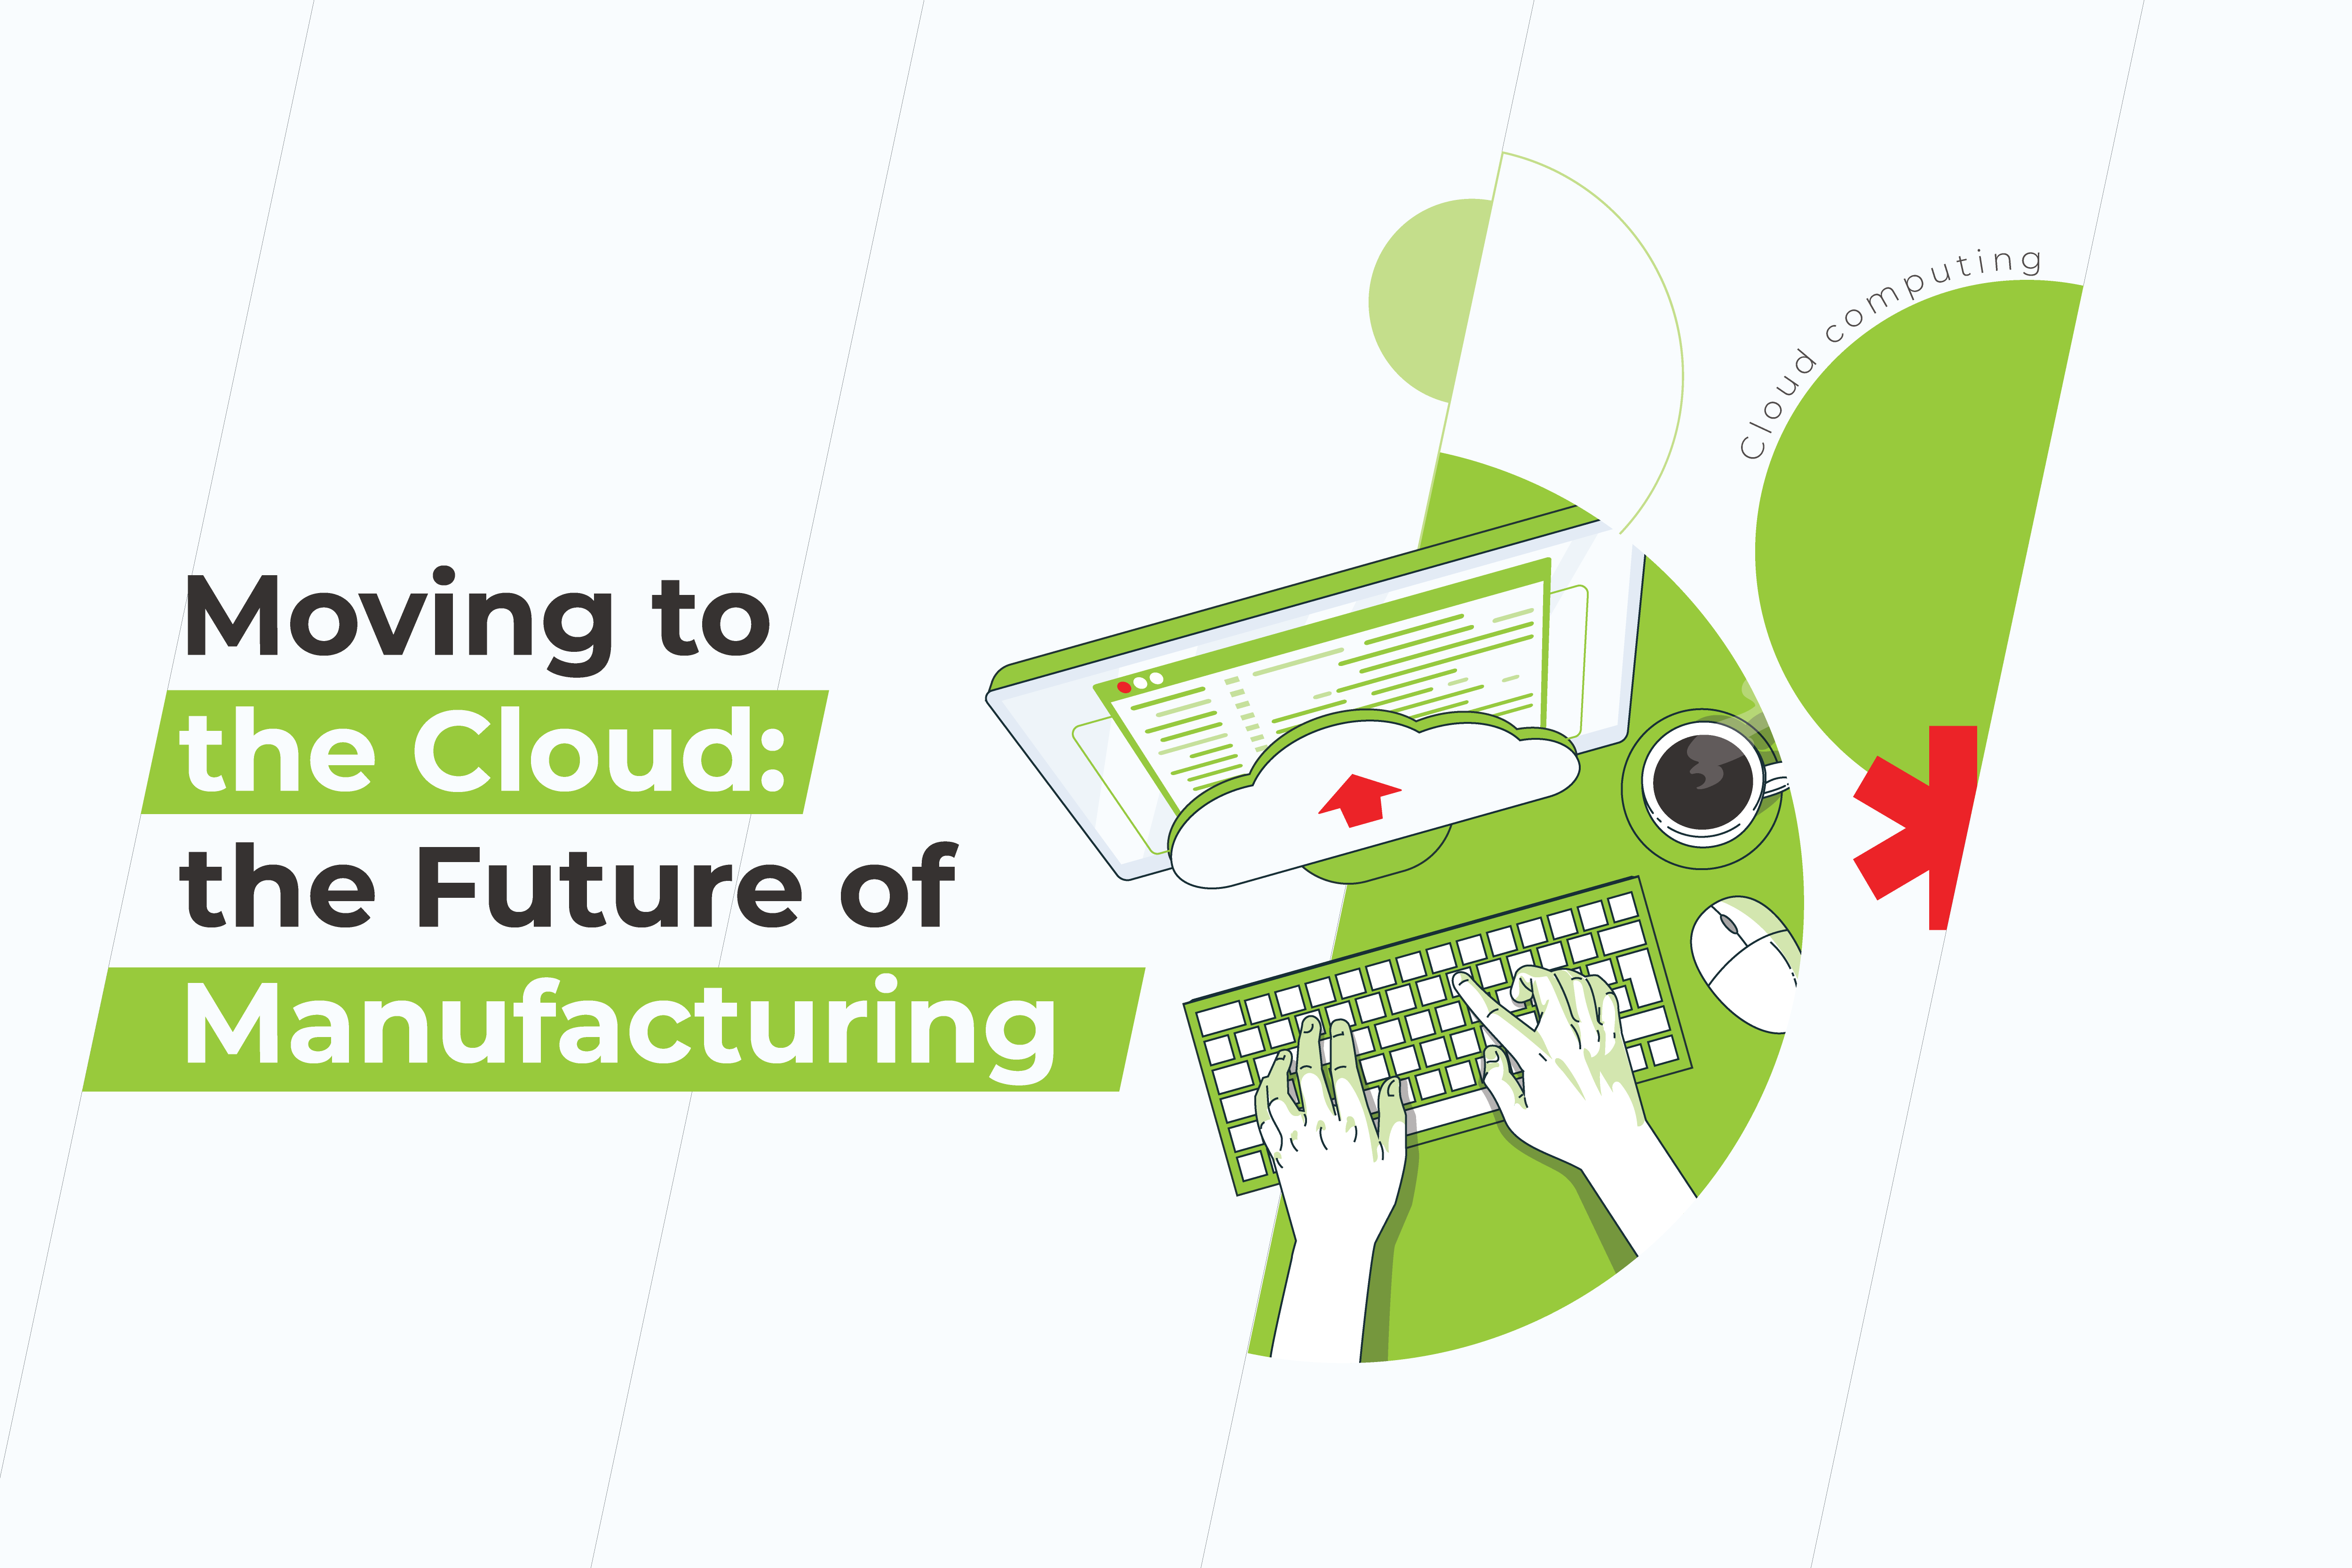 Moving to the Cloud: The Future of Manufacturing